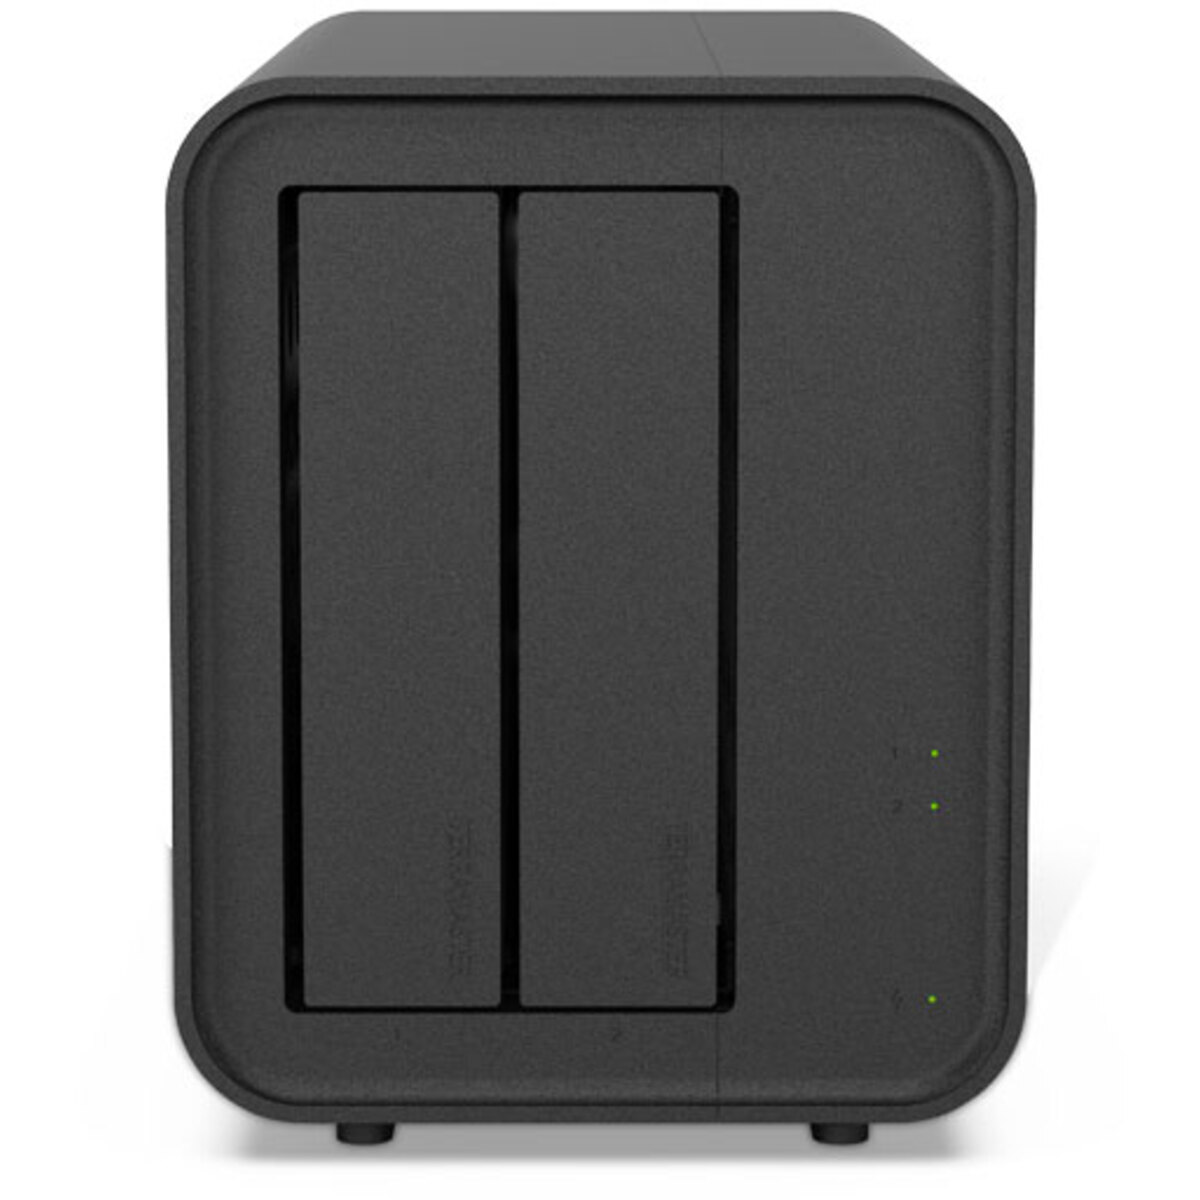 TerraMaster D5 Hybrid 28tb 2-Bay Desktop Multimedia / Power User / Business DAS - Direct Attached Storage Device 2x14tb Seagate IronWolf Pro ST14000NT001 3.5 7200rpm SATA 6Gb/s HDD NAS Class Drives Installed - Burn-In Tested D5 Hybrid